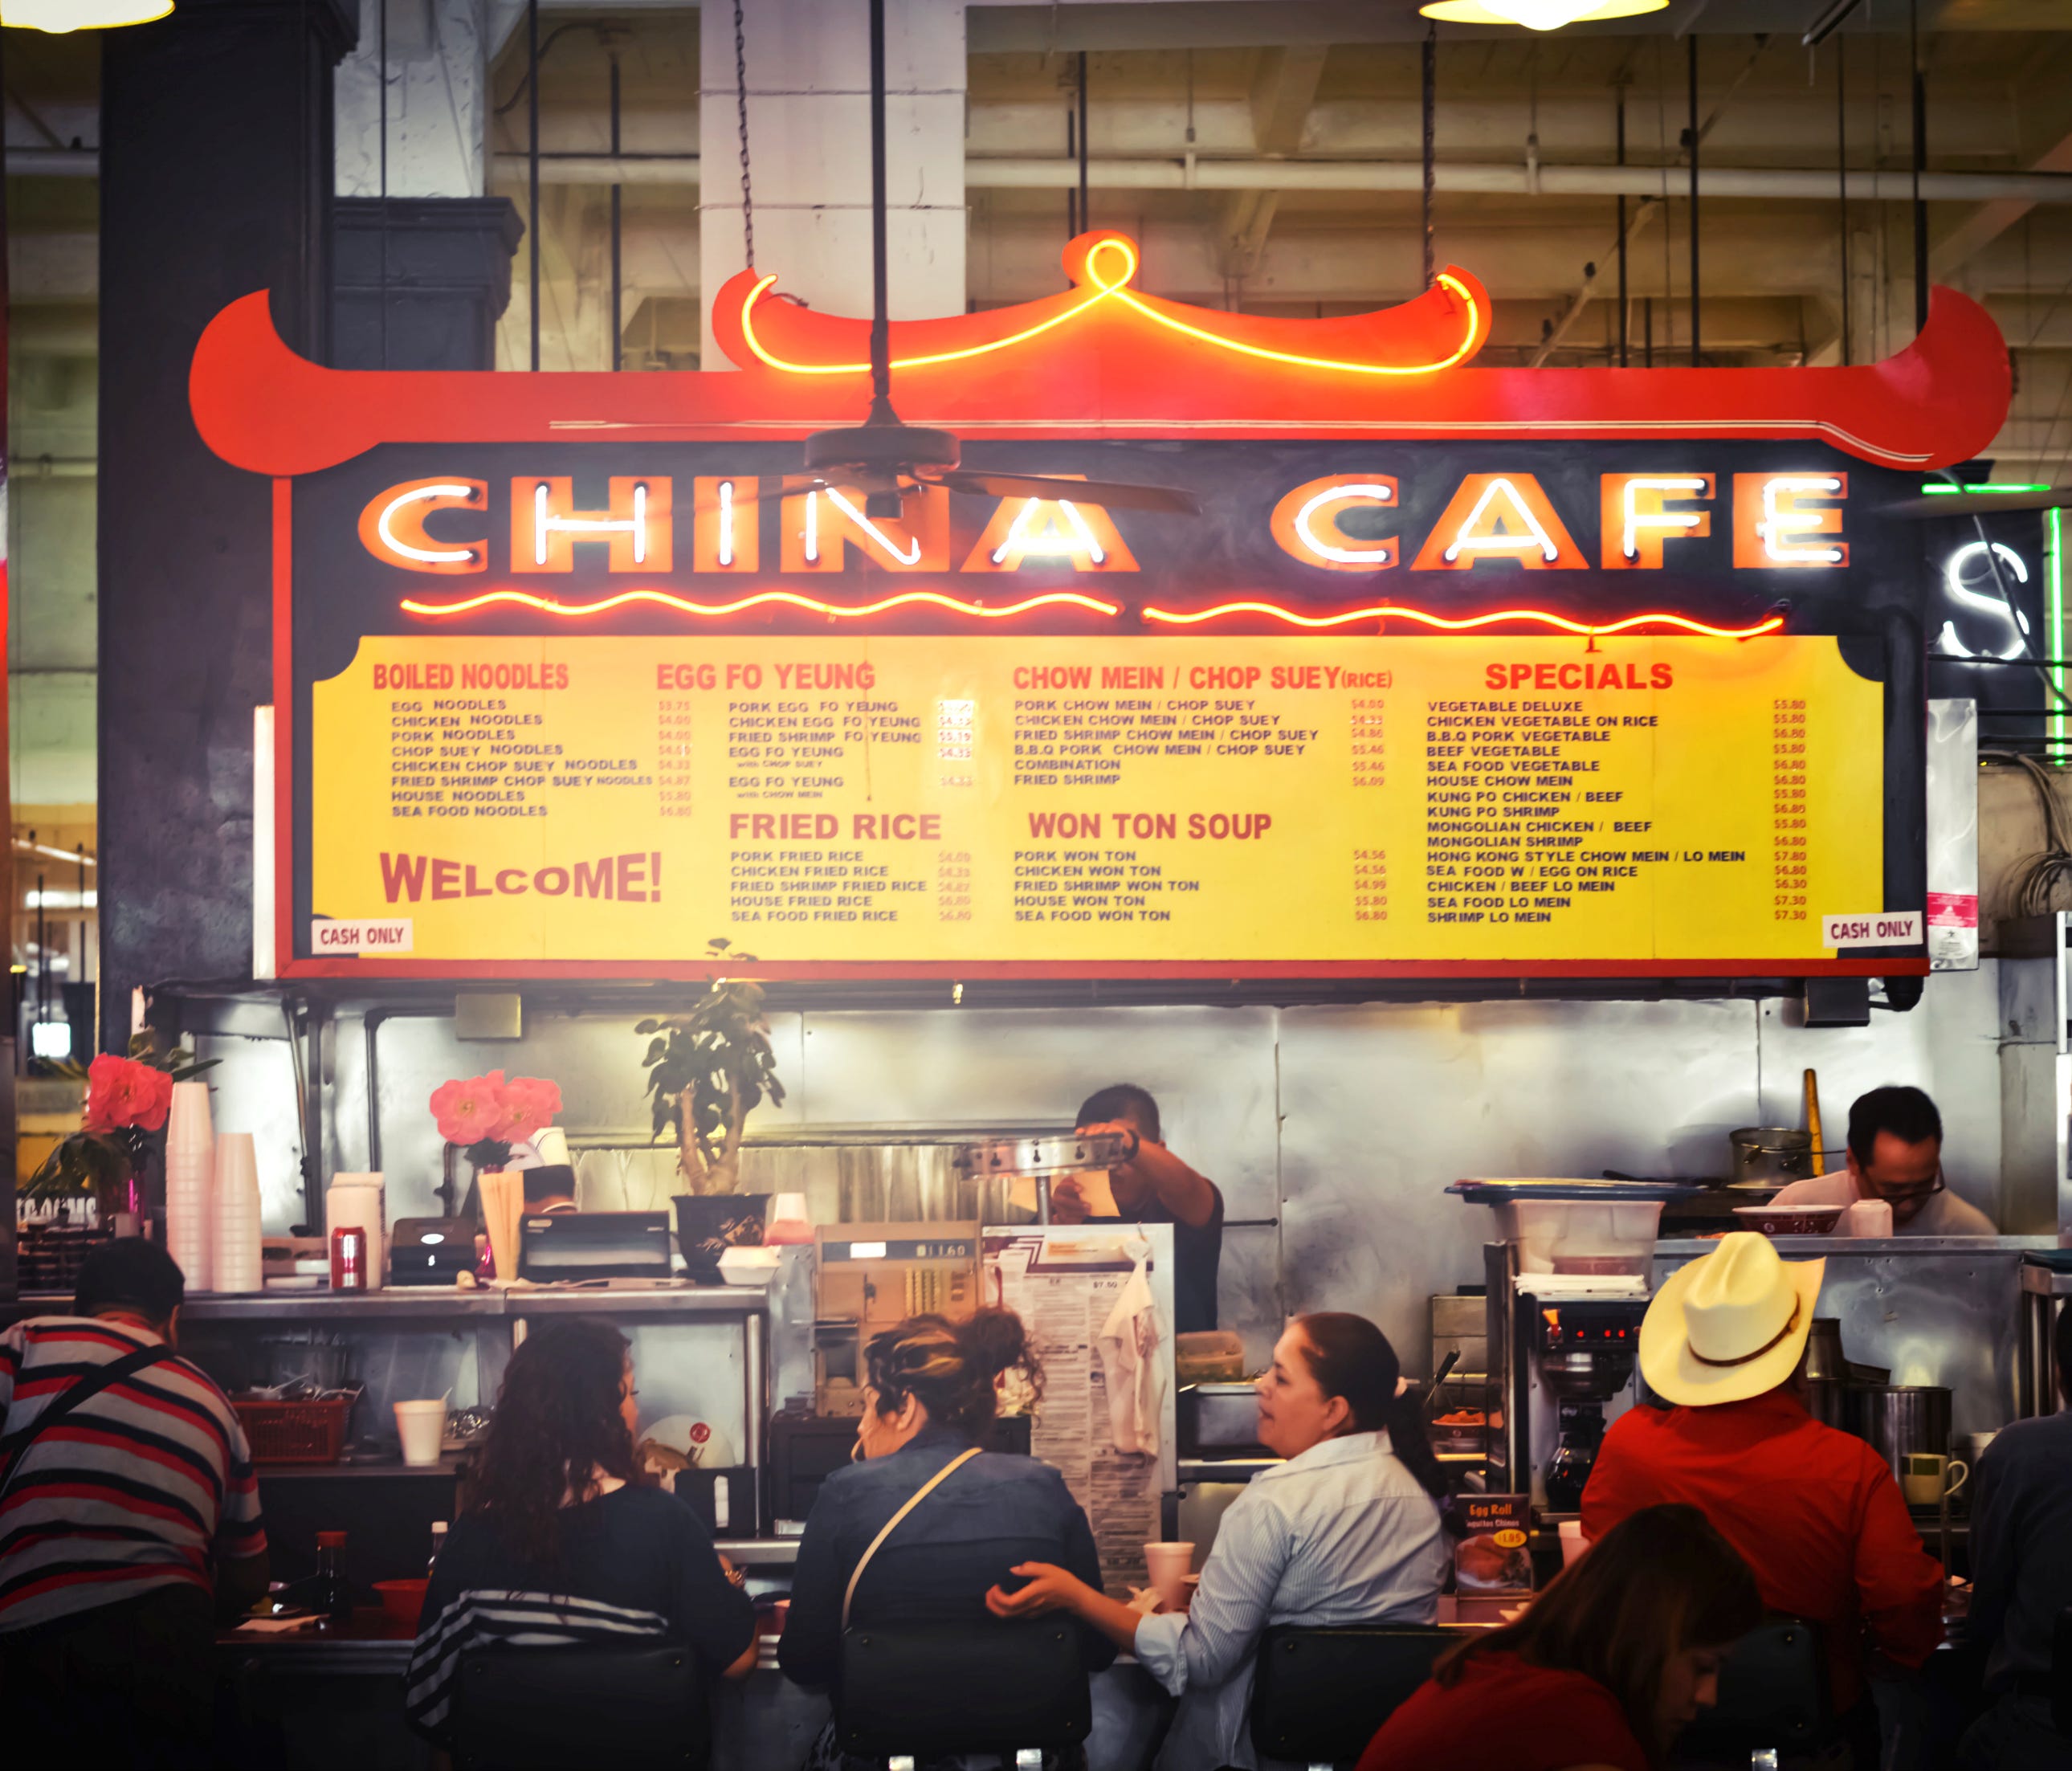 China Cafe has been a staple inside Los Angeles' Grand Central Market since 1959, serving boiled noodles, chow mein, fried rice and won ton soup.